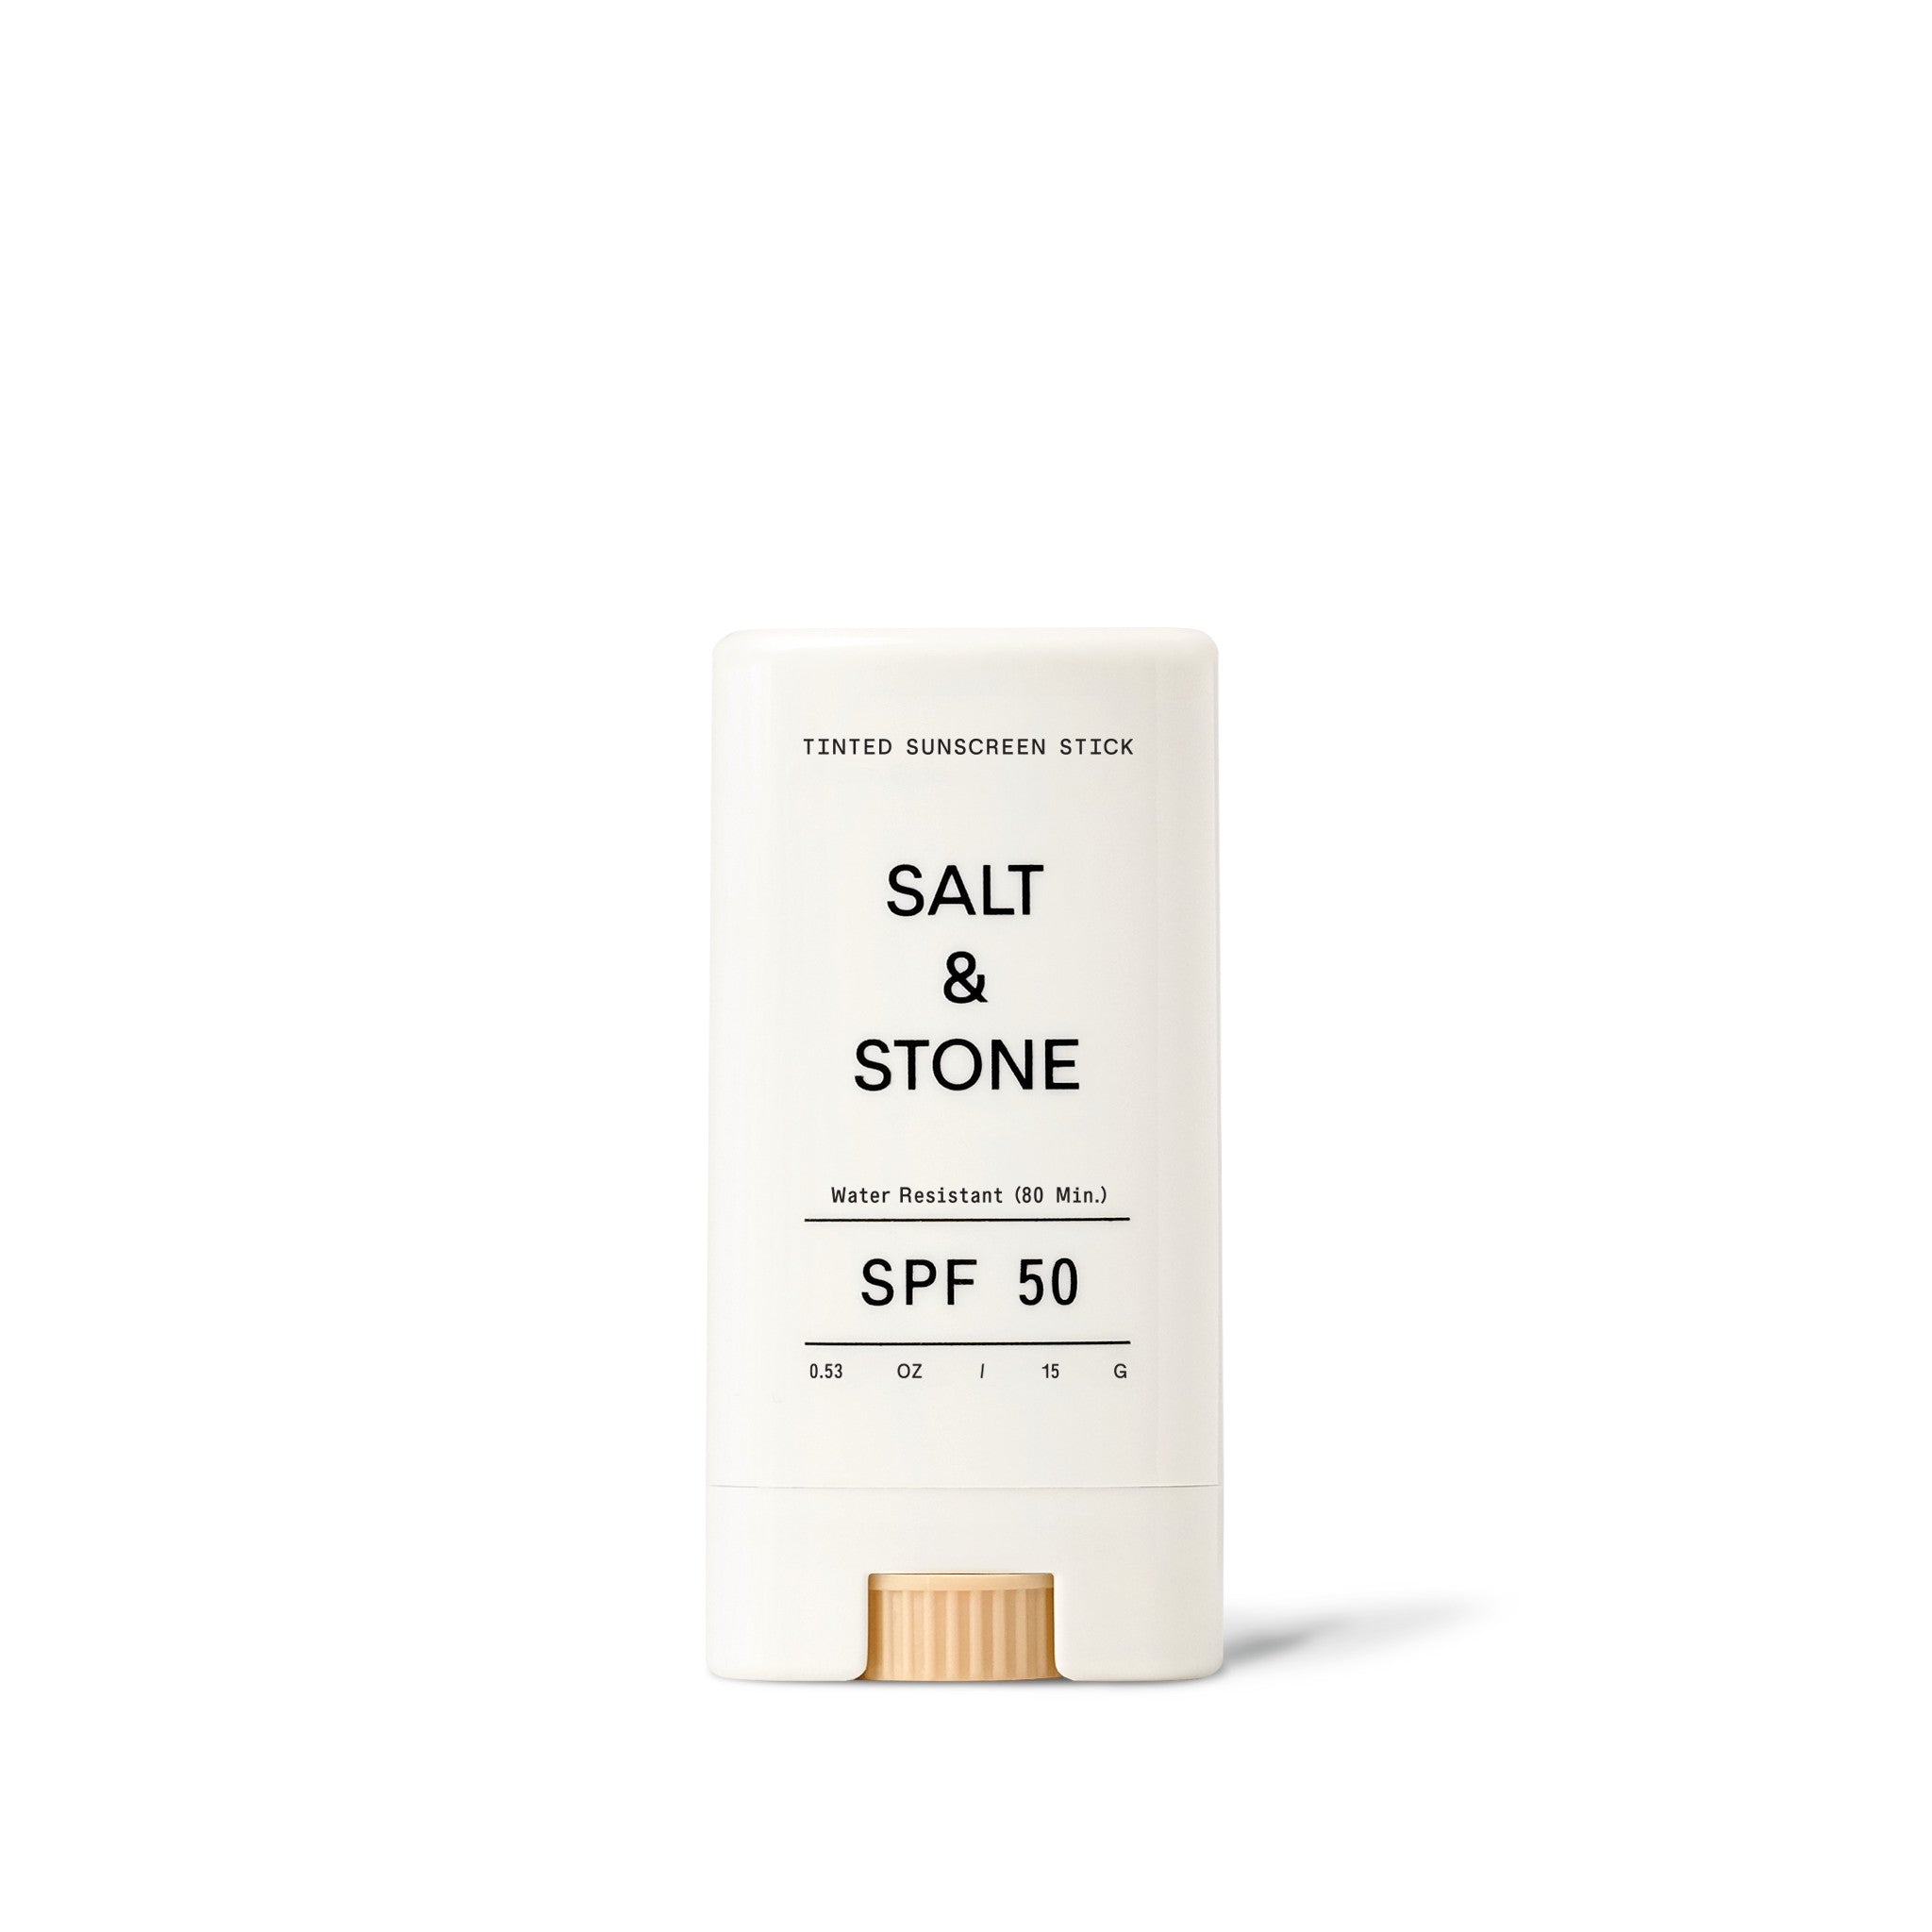 Salt & Stone SPF 50 Mineral-Based Face Stick Tinted